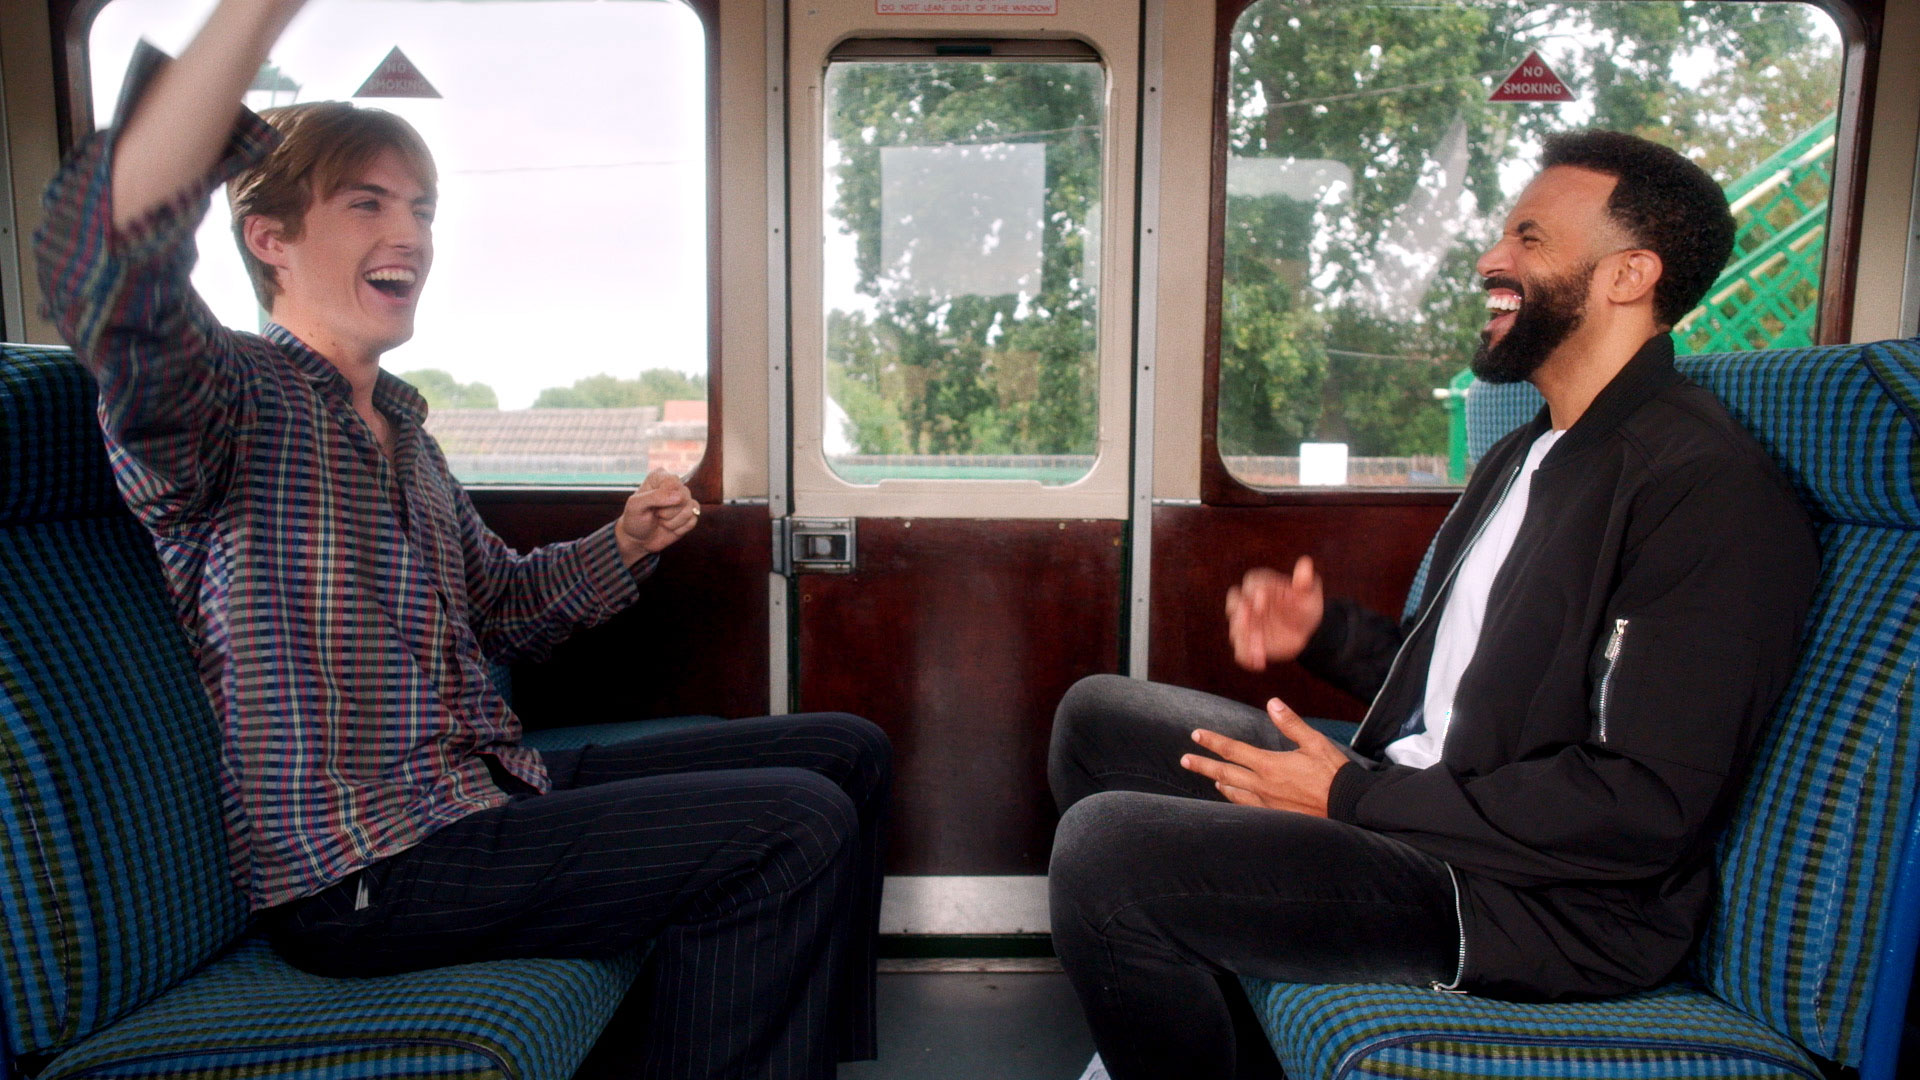 Craig David & Francis Bourgeois discuss all things ‘train’ in latest Trainline campaign